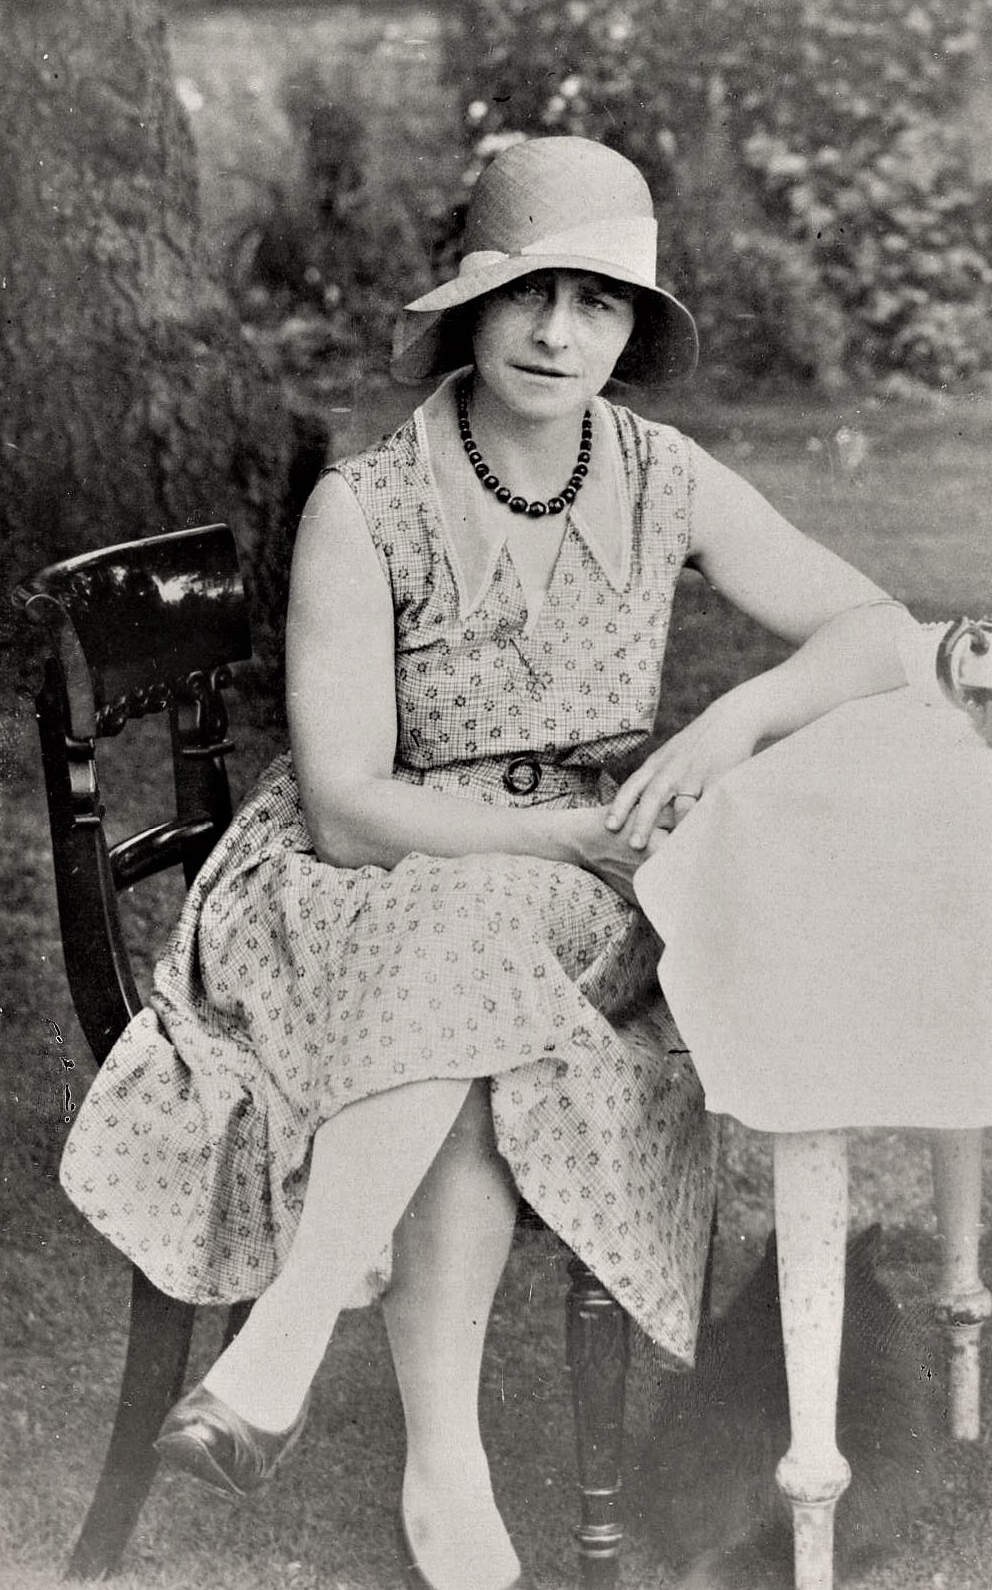 Vintage photo of a lady sat on a chair in a dress and hat as an example of biography writing and publishing